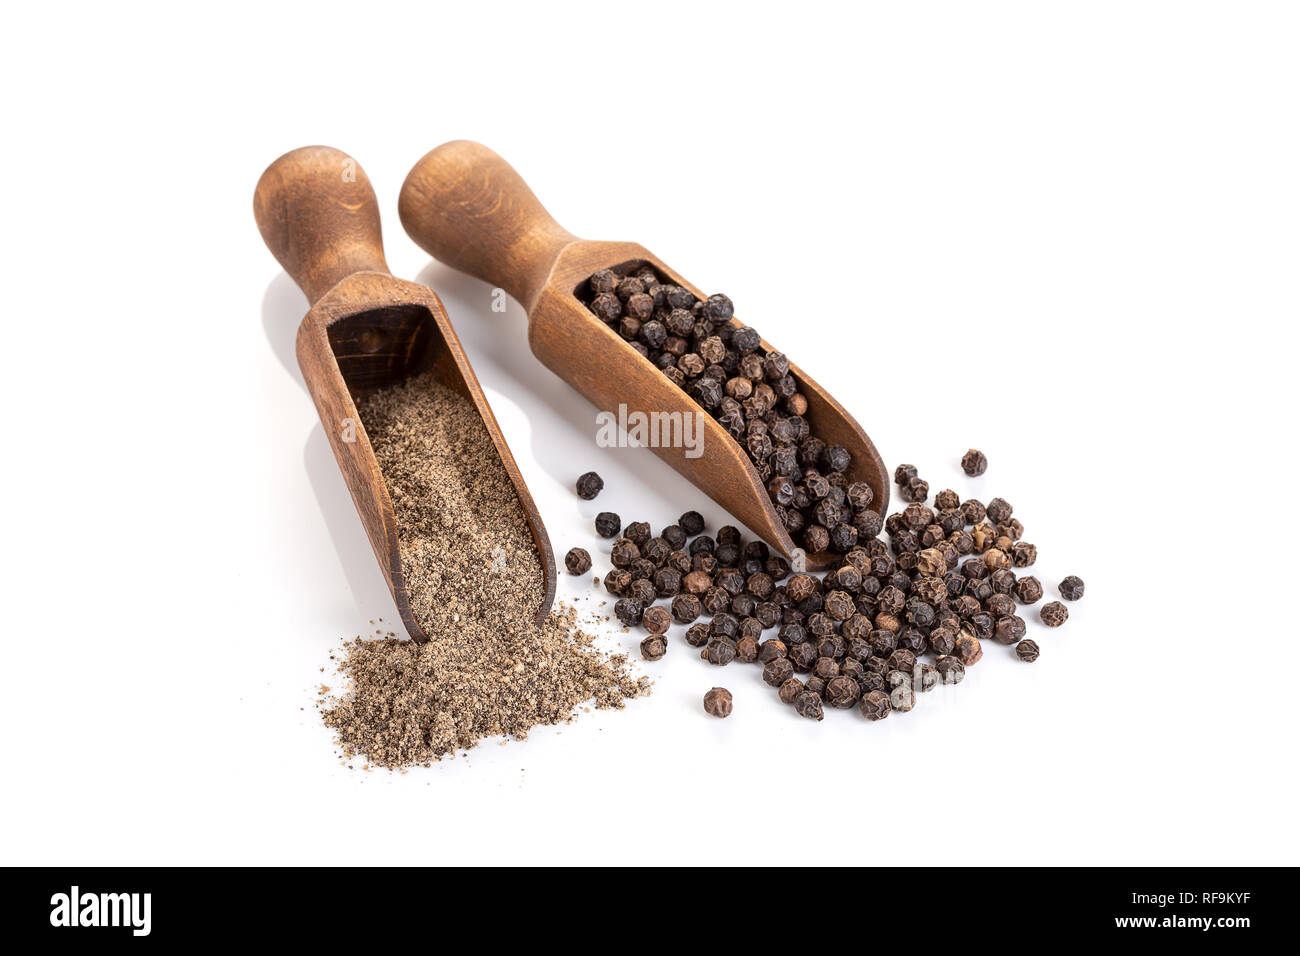 Black pepper seeds and Black pepper ground isolated on white background. Copy space. Piper nigrum Stock Photo